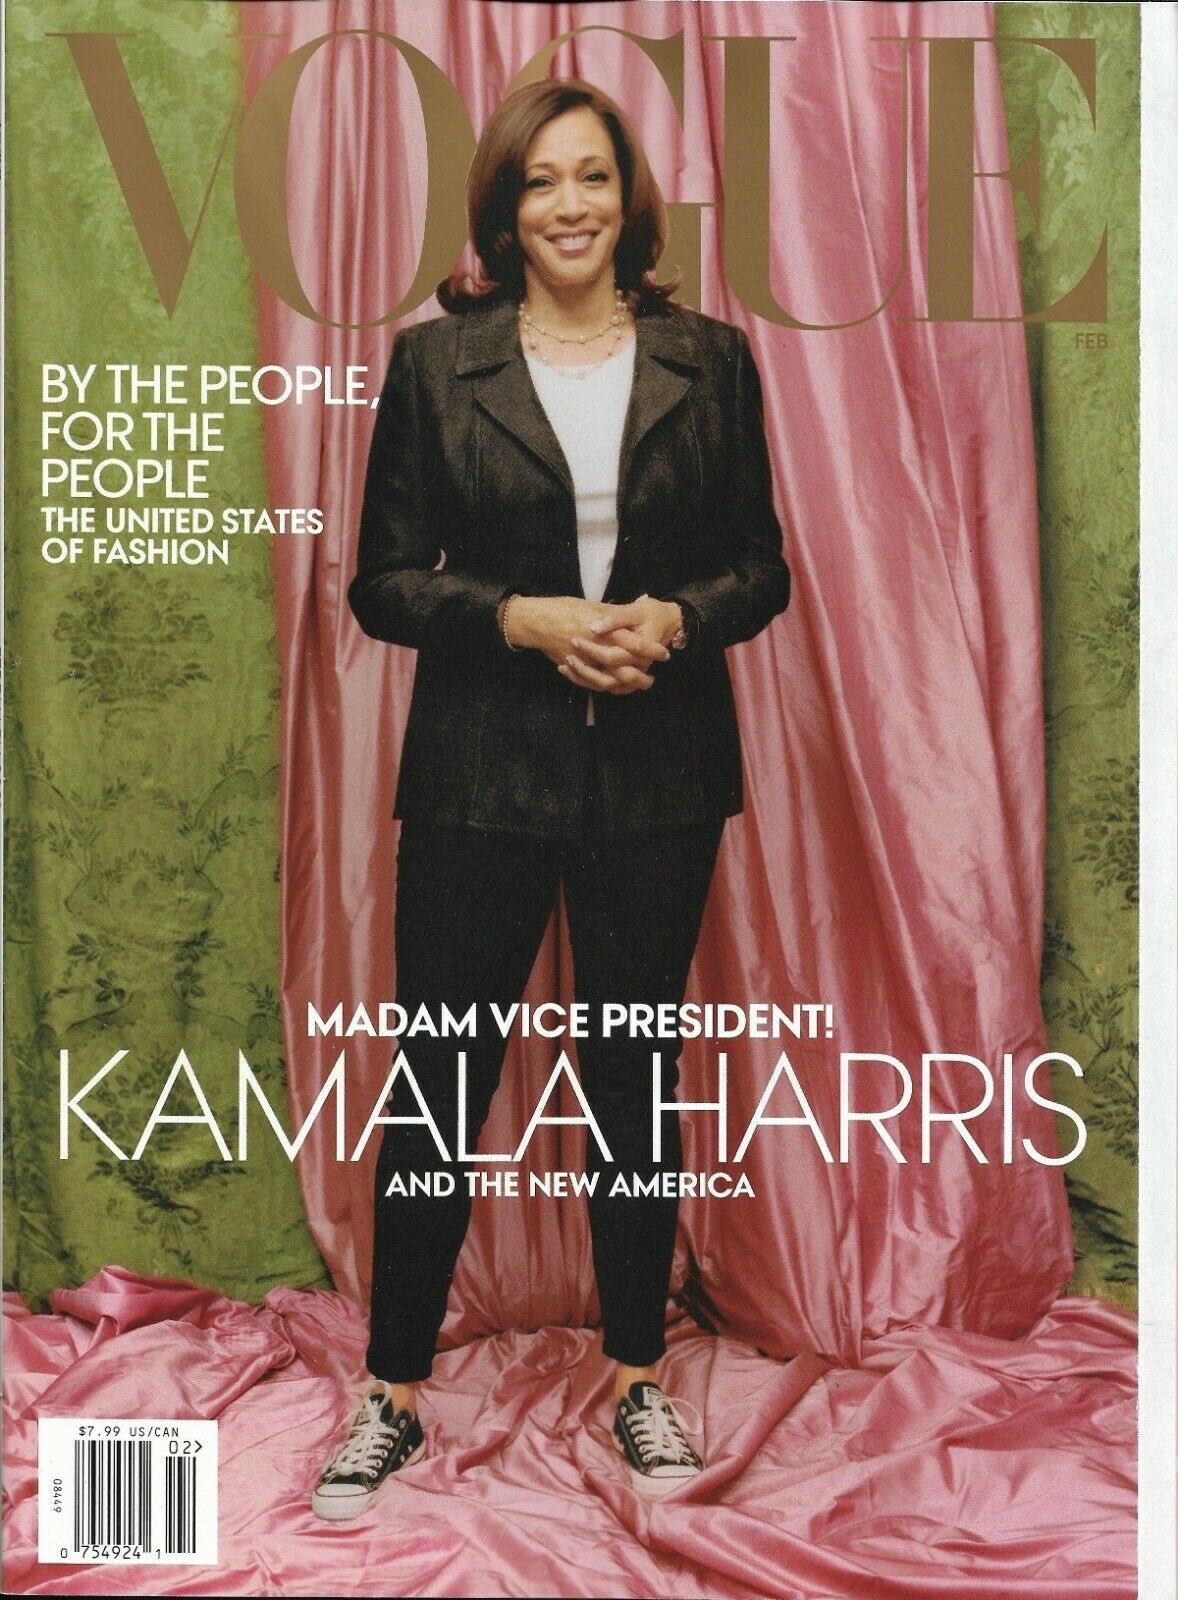 Models Daily Vice President Elect Kamala Harris Is On The Cover Of Vogue S February Issue